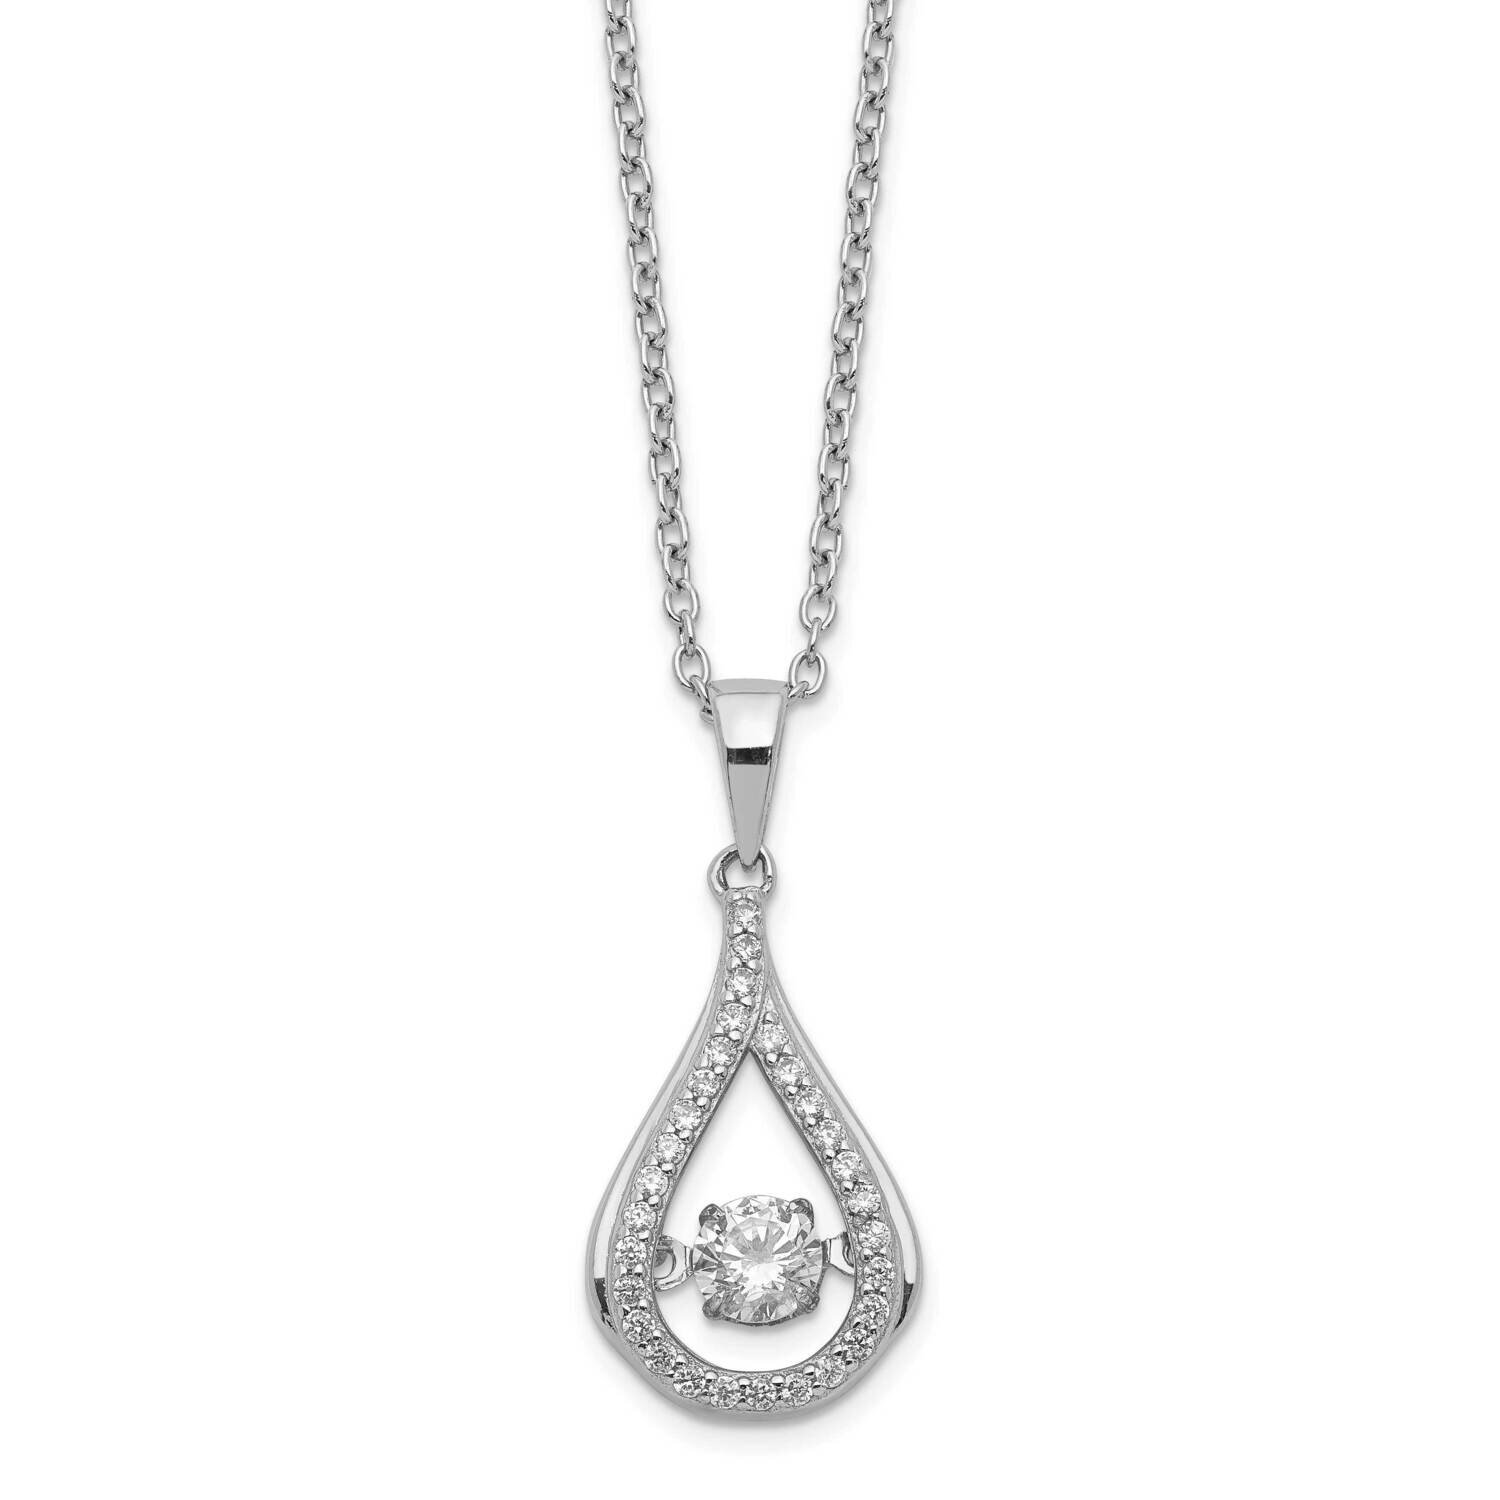 Cheryl M Vibrant Cz Pear 18 Inch Necklace Sterling Silver Rhodium-plated QCM1431-18